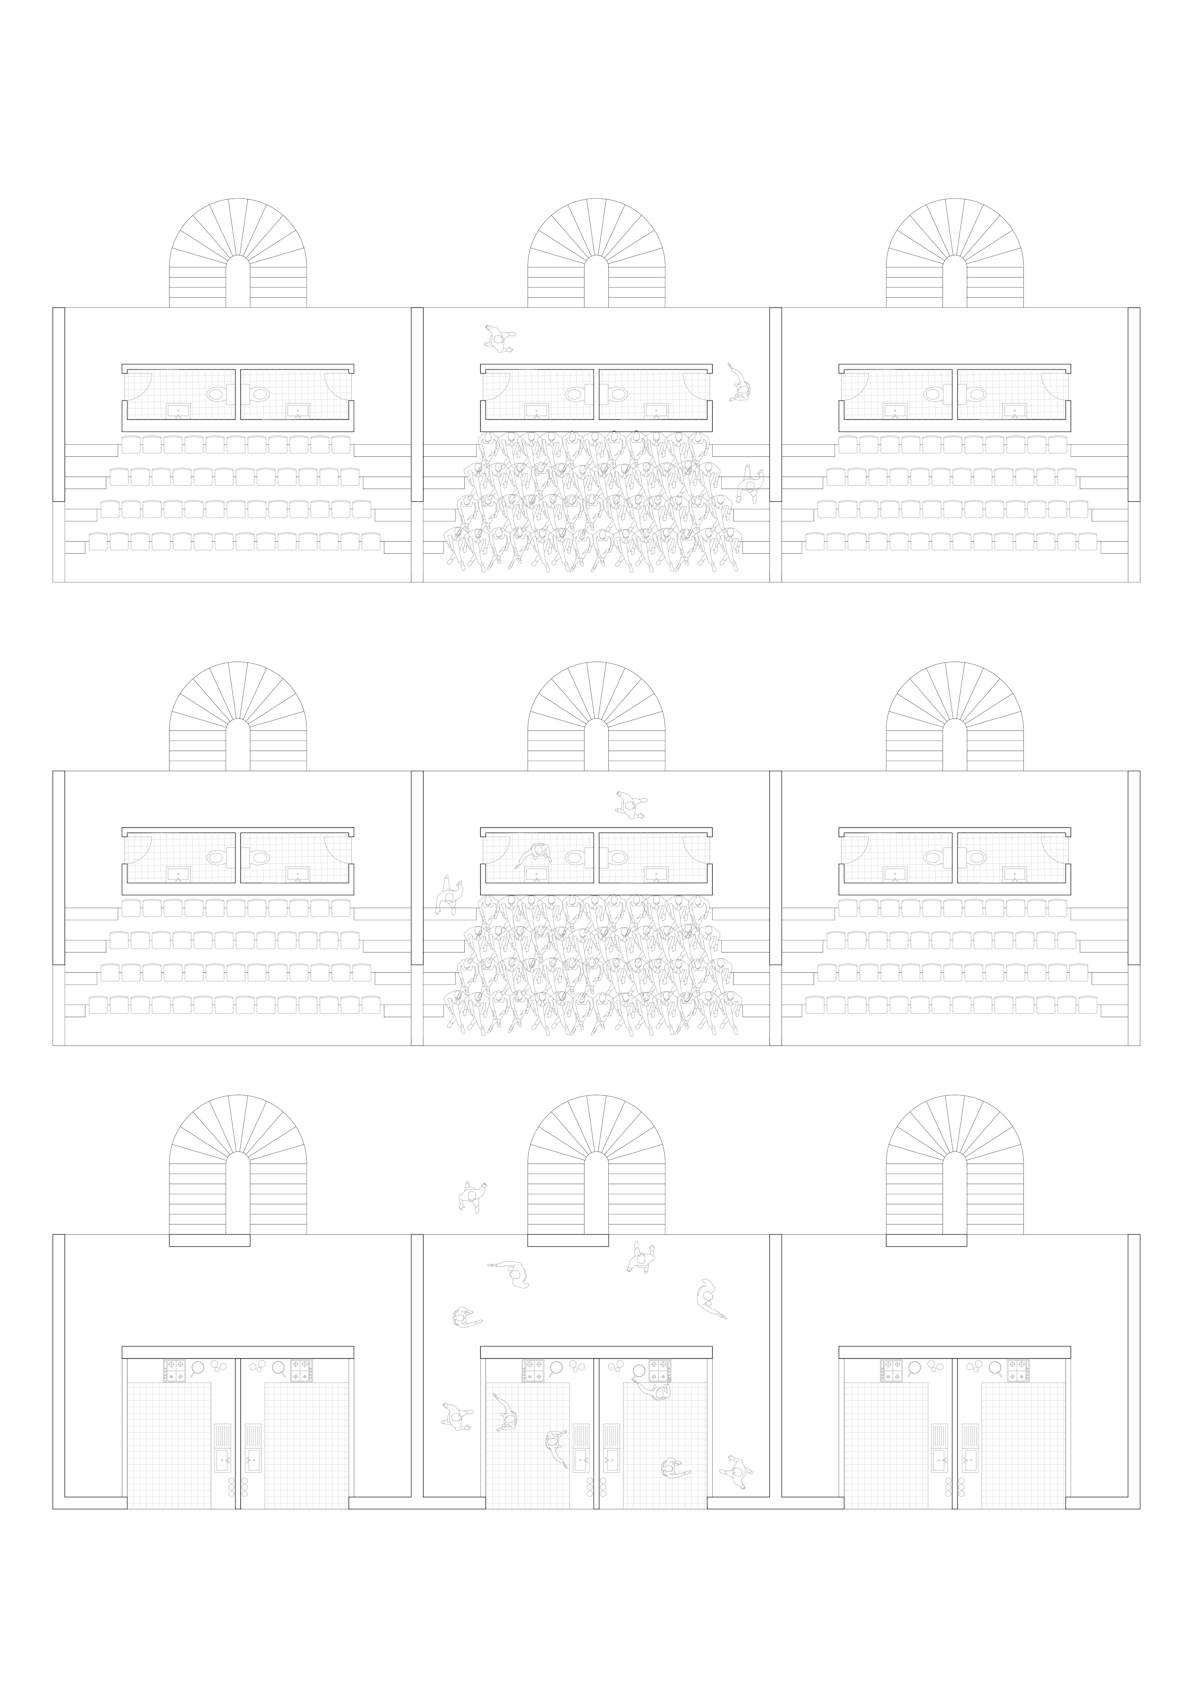 02 Distancing Stadium Plan alcoves 100eme Sophie Costa Desired Spaces